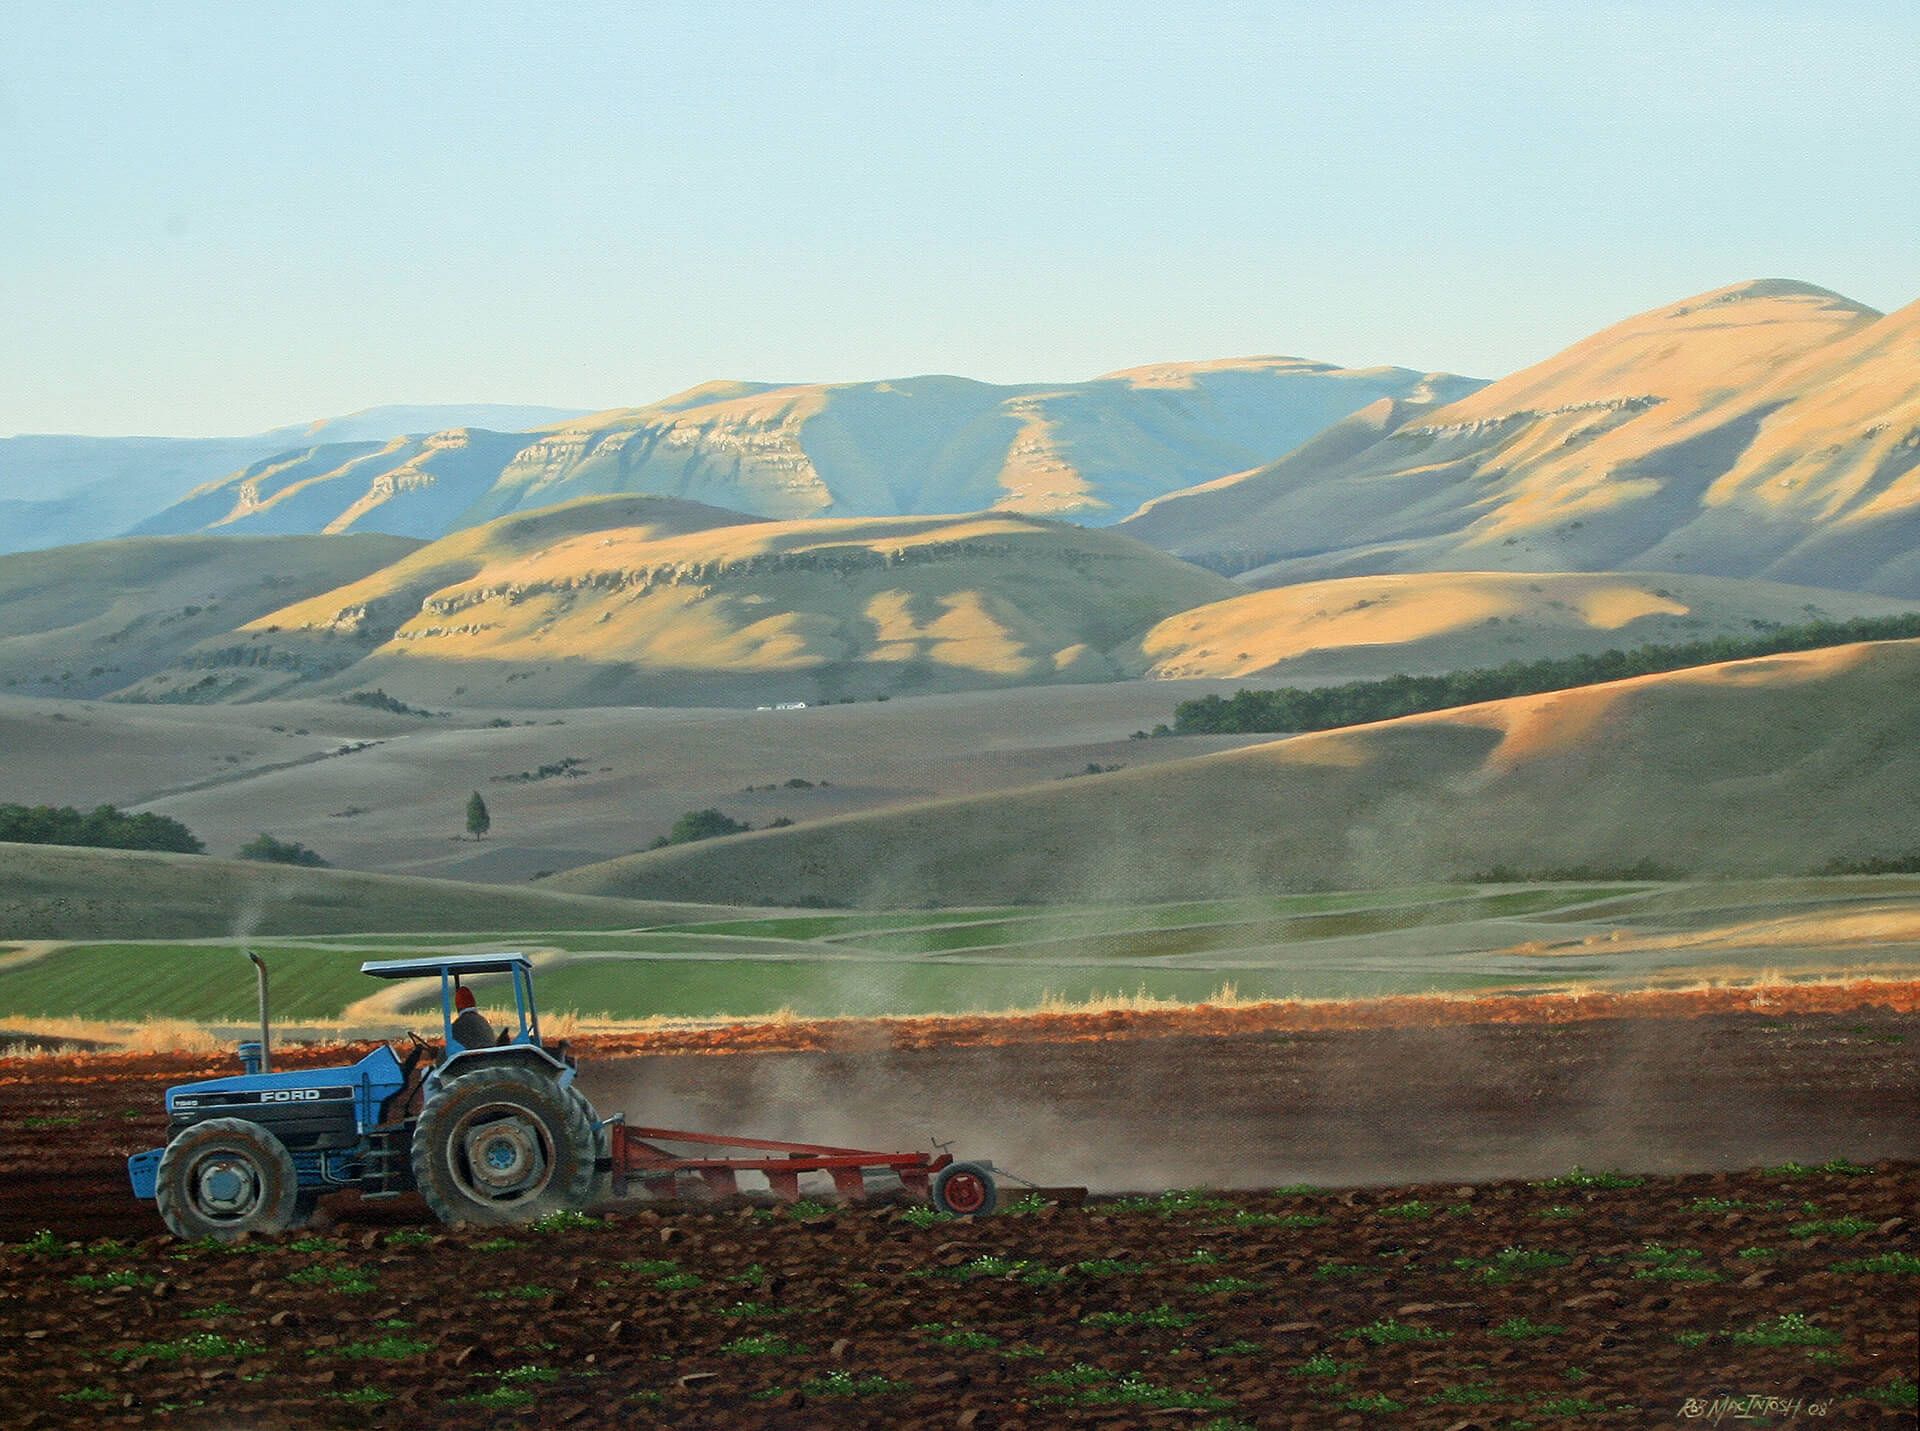 Photorealistic painting of a tractor plowing a field